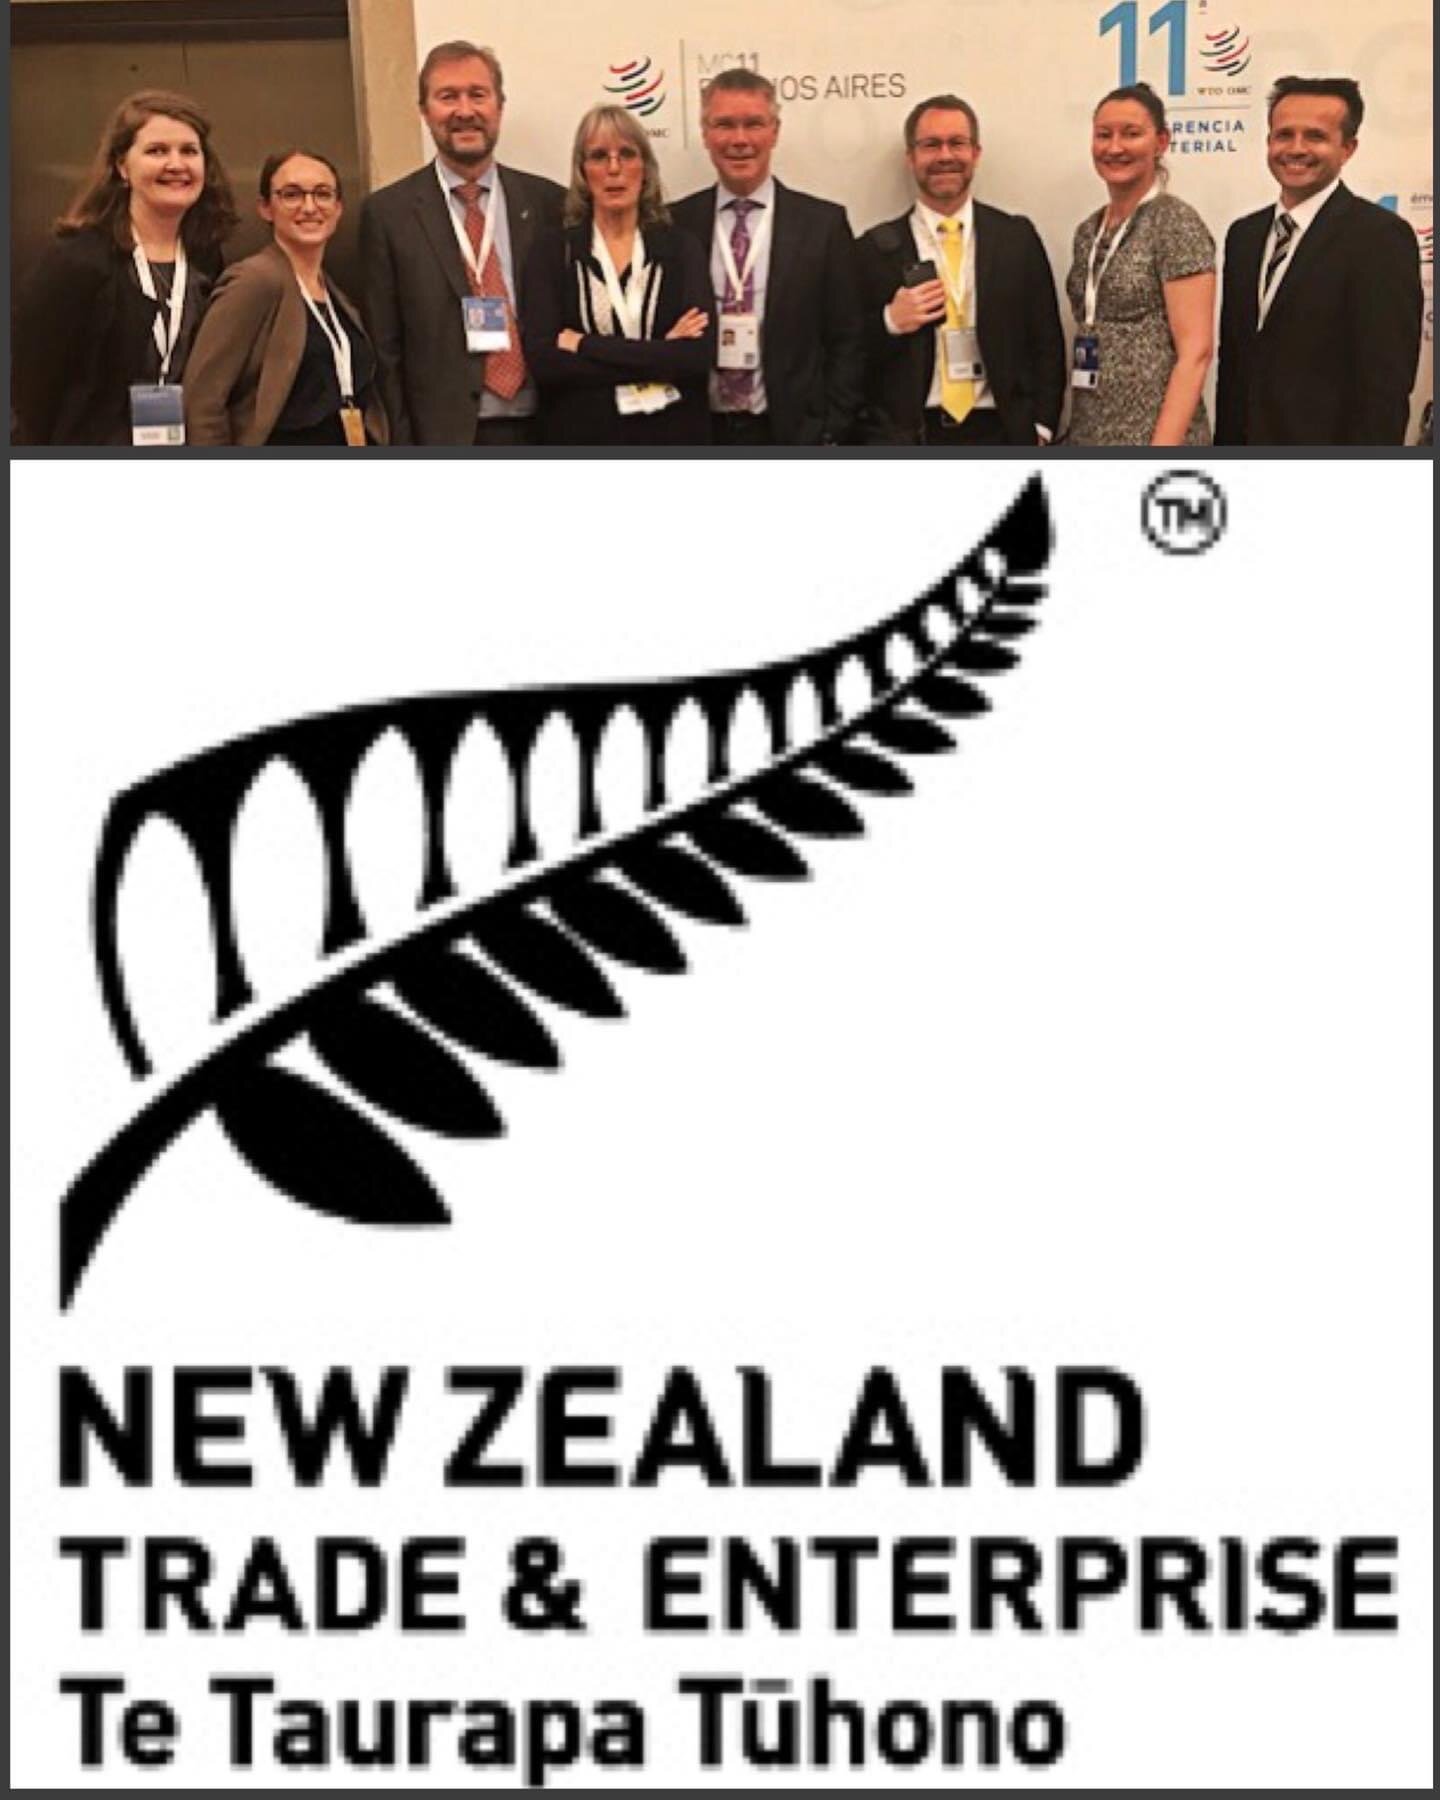 Tom Barker: Working at the last WTO ministerial conference, where the New Zealand negotiation team of around a dozen was dwarfed by others.